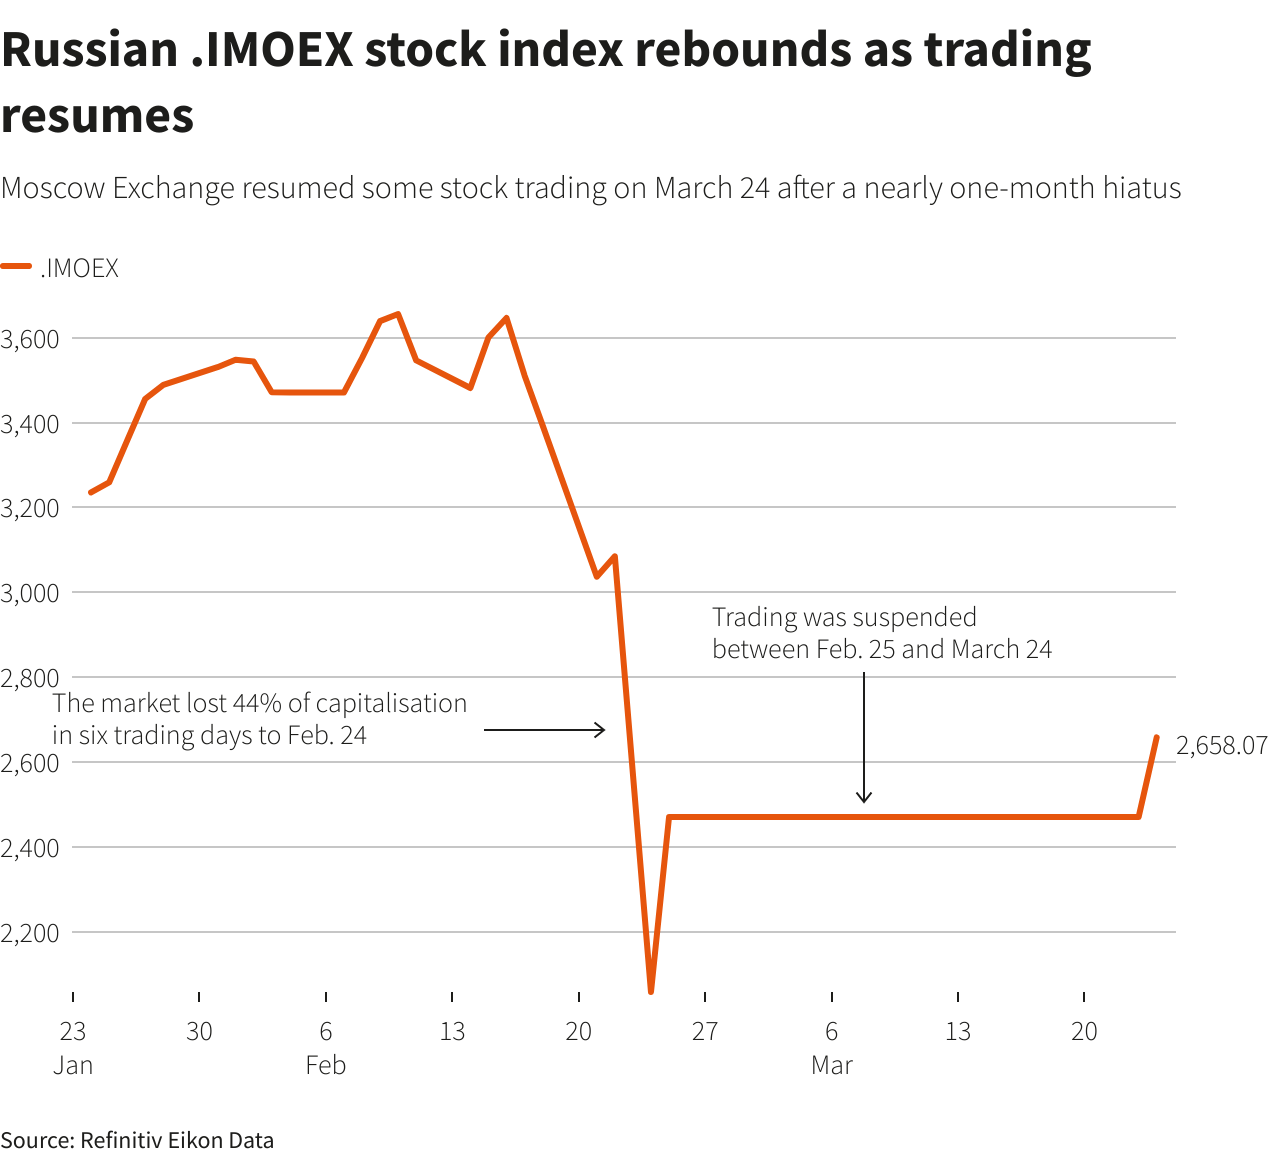 Russian .IMOEX stock index rebounds as trading resumes